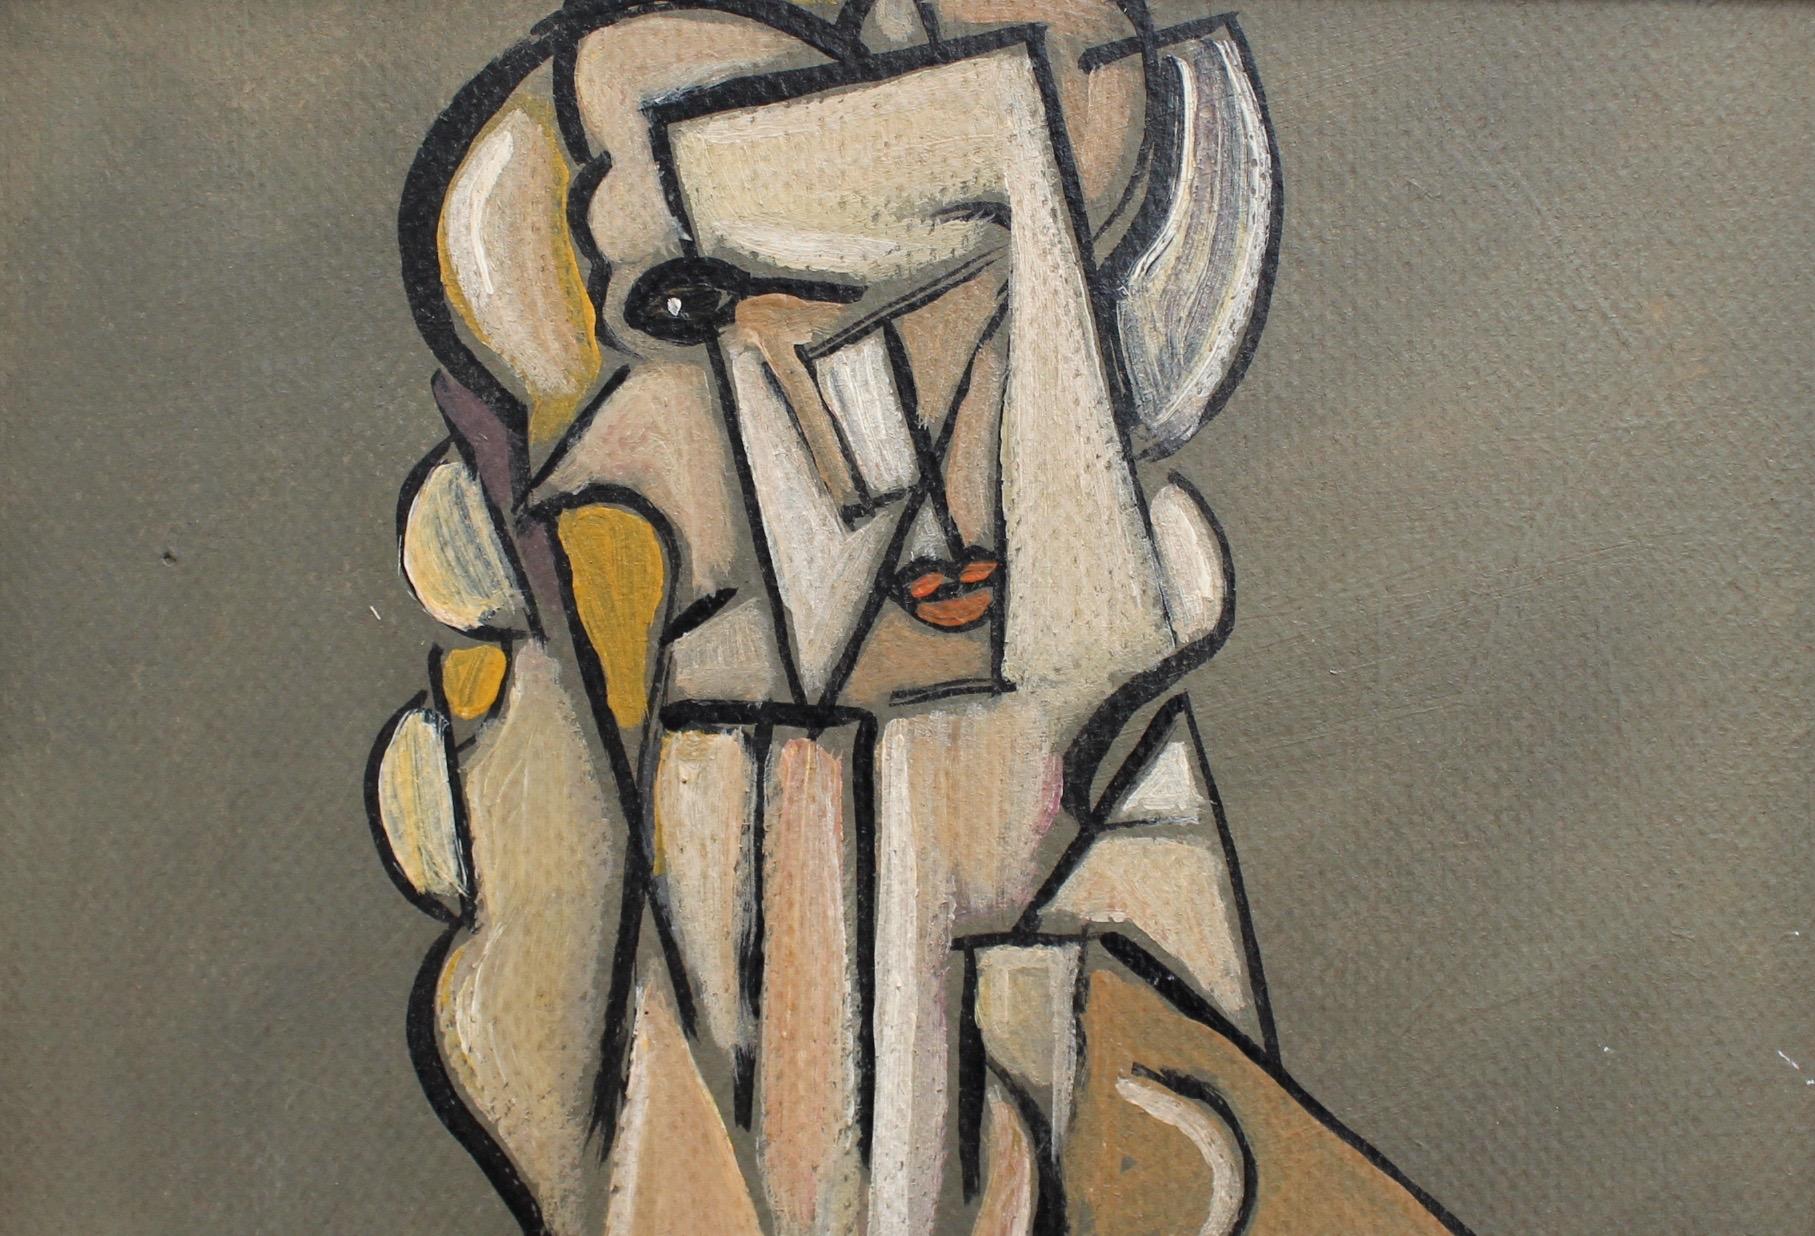 Musician with Harp - Cubist Painting by J.G.